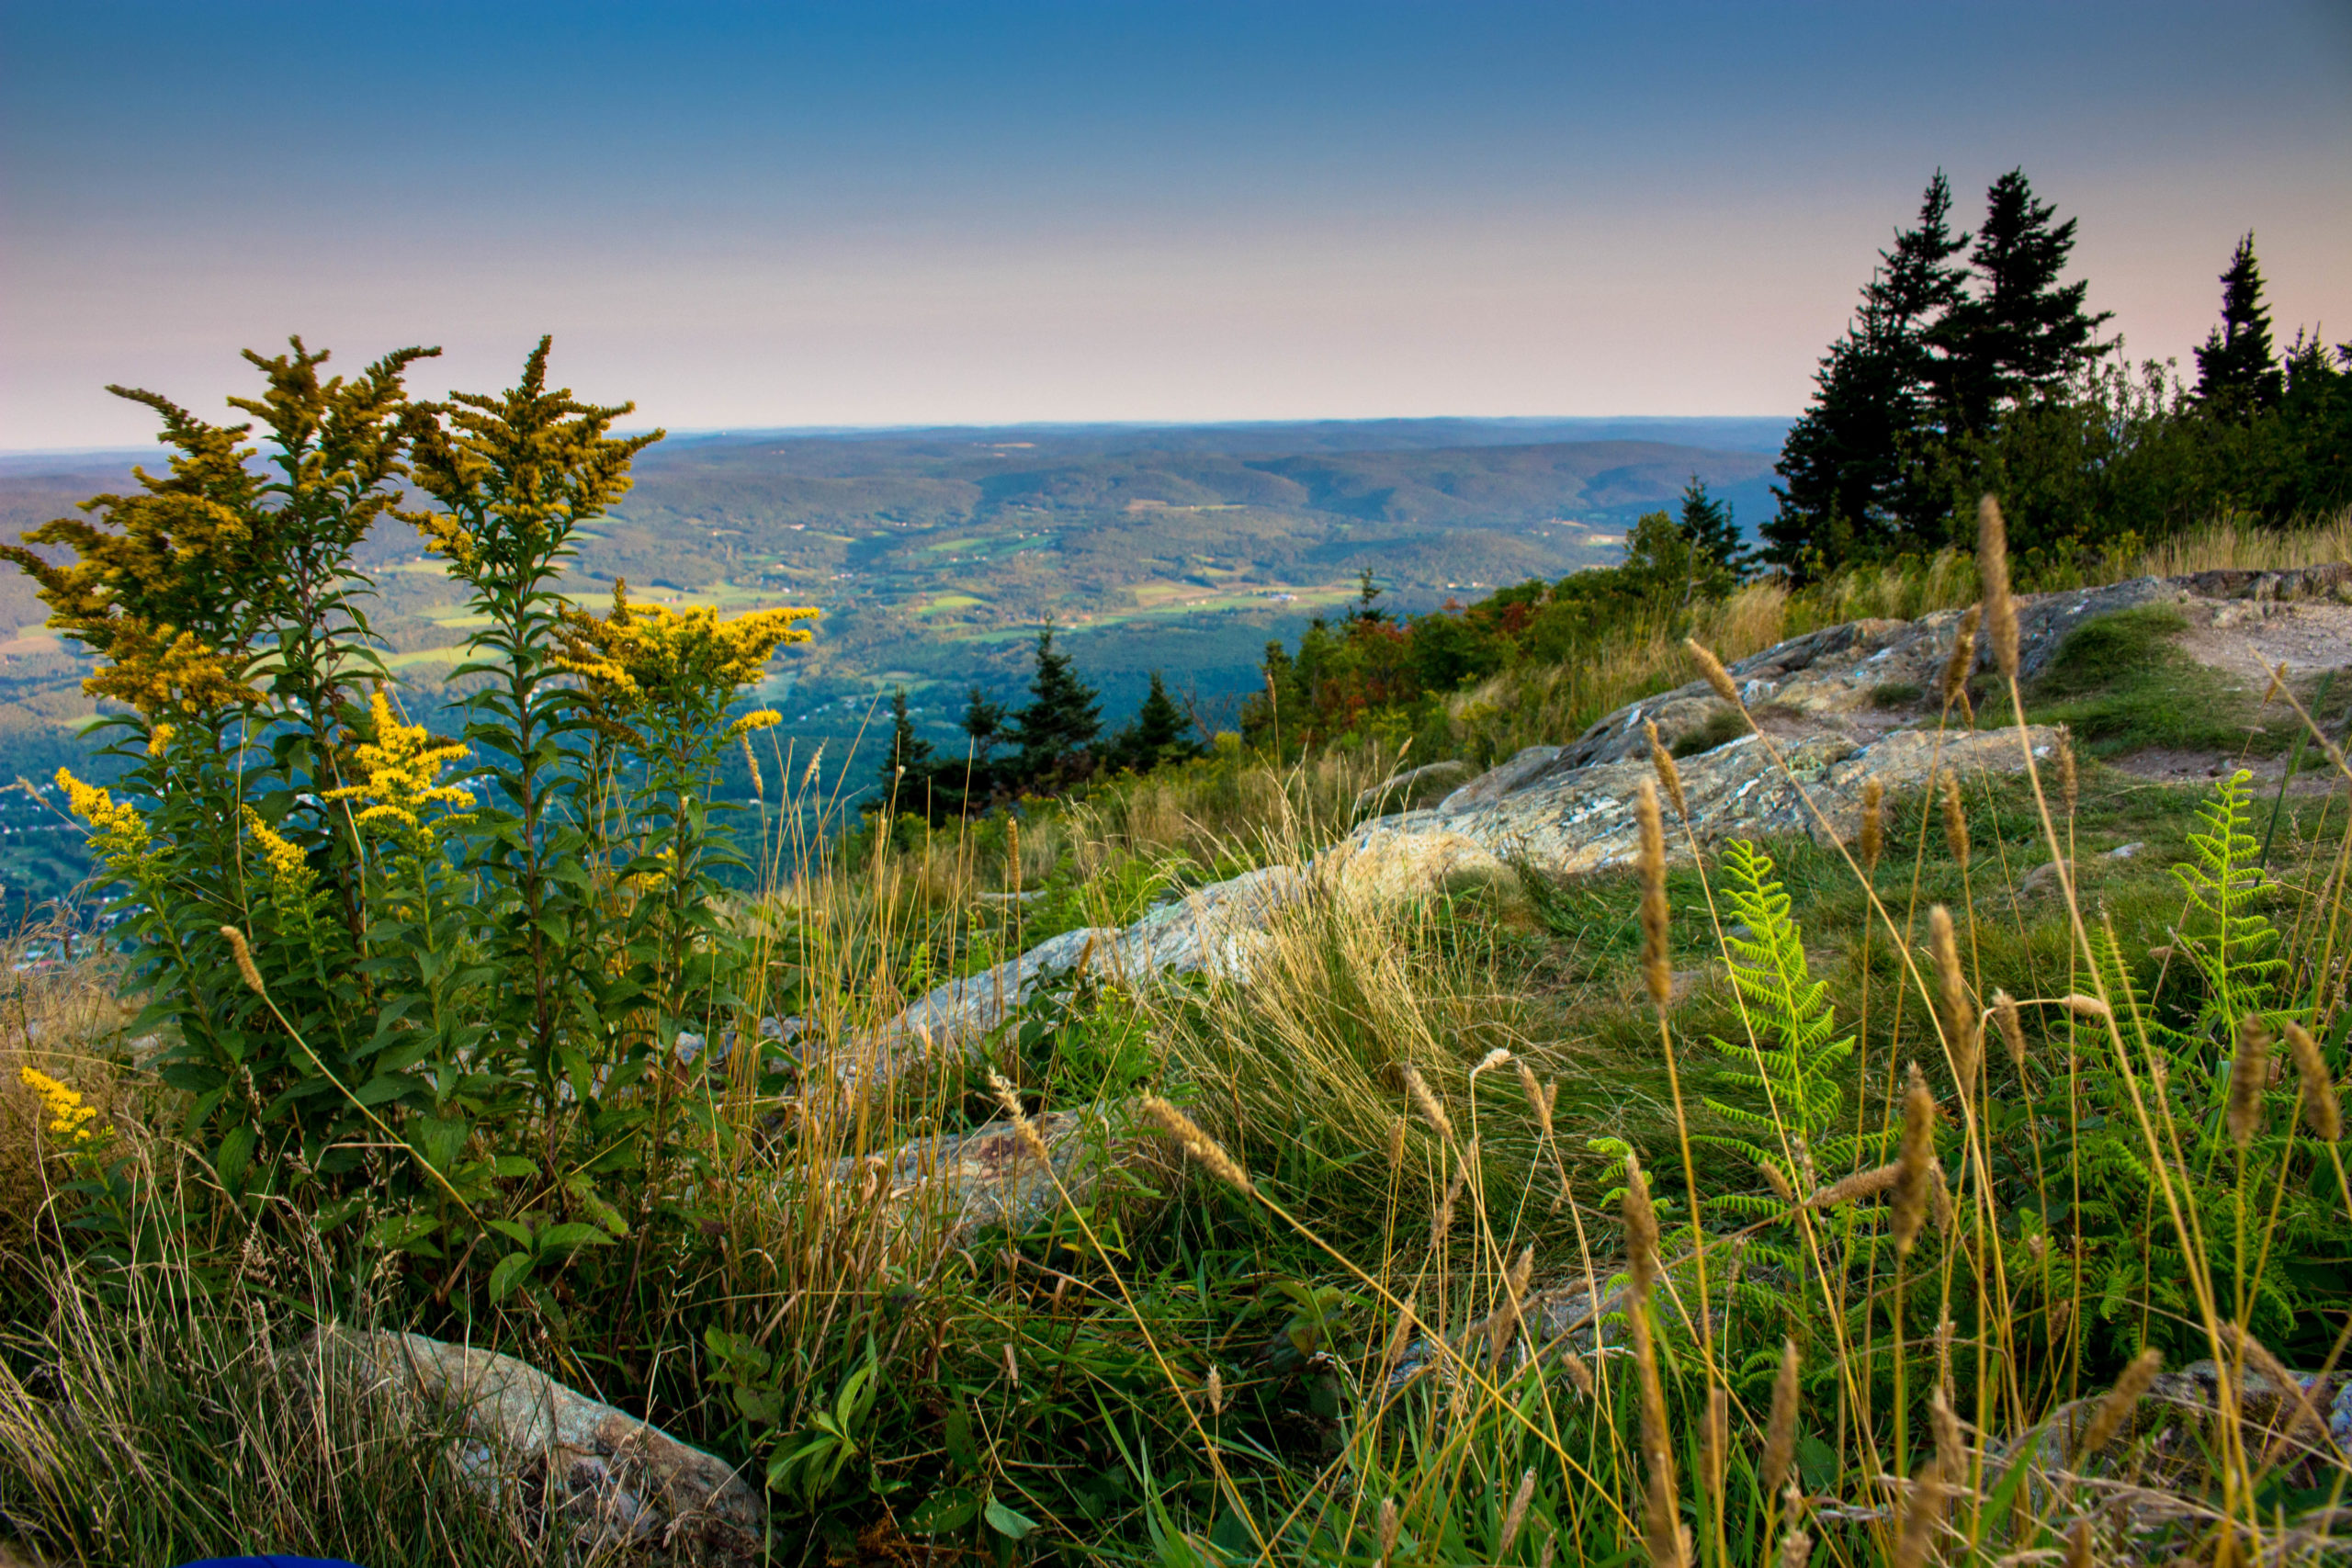 Sept. 4, 2016. Mt. Greylock, Mt. Greylock State Reservation, Massachusetts-- AMC Photo Contest entry in the Landscapes and Nature category in 2017. Photo by David James.